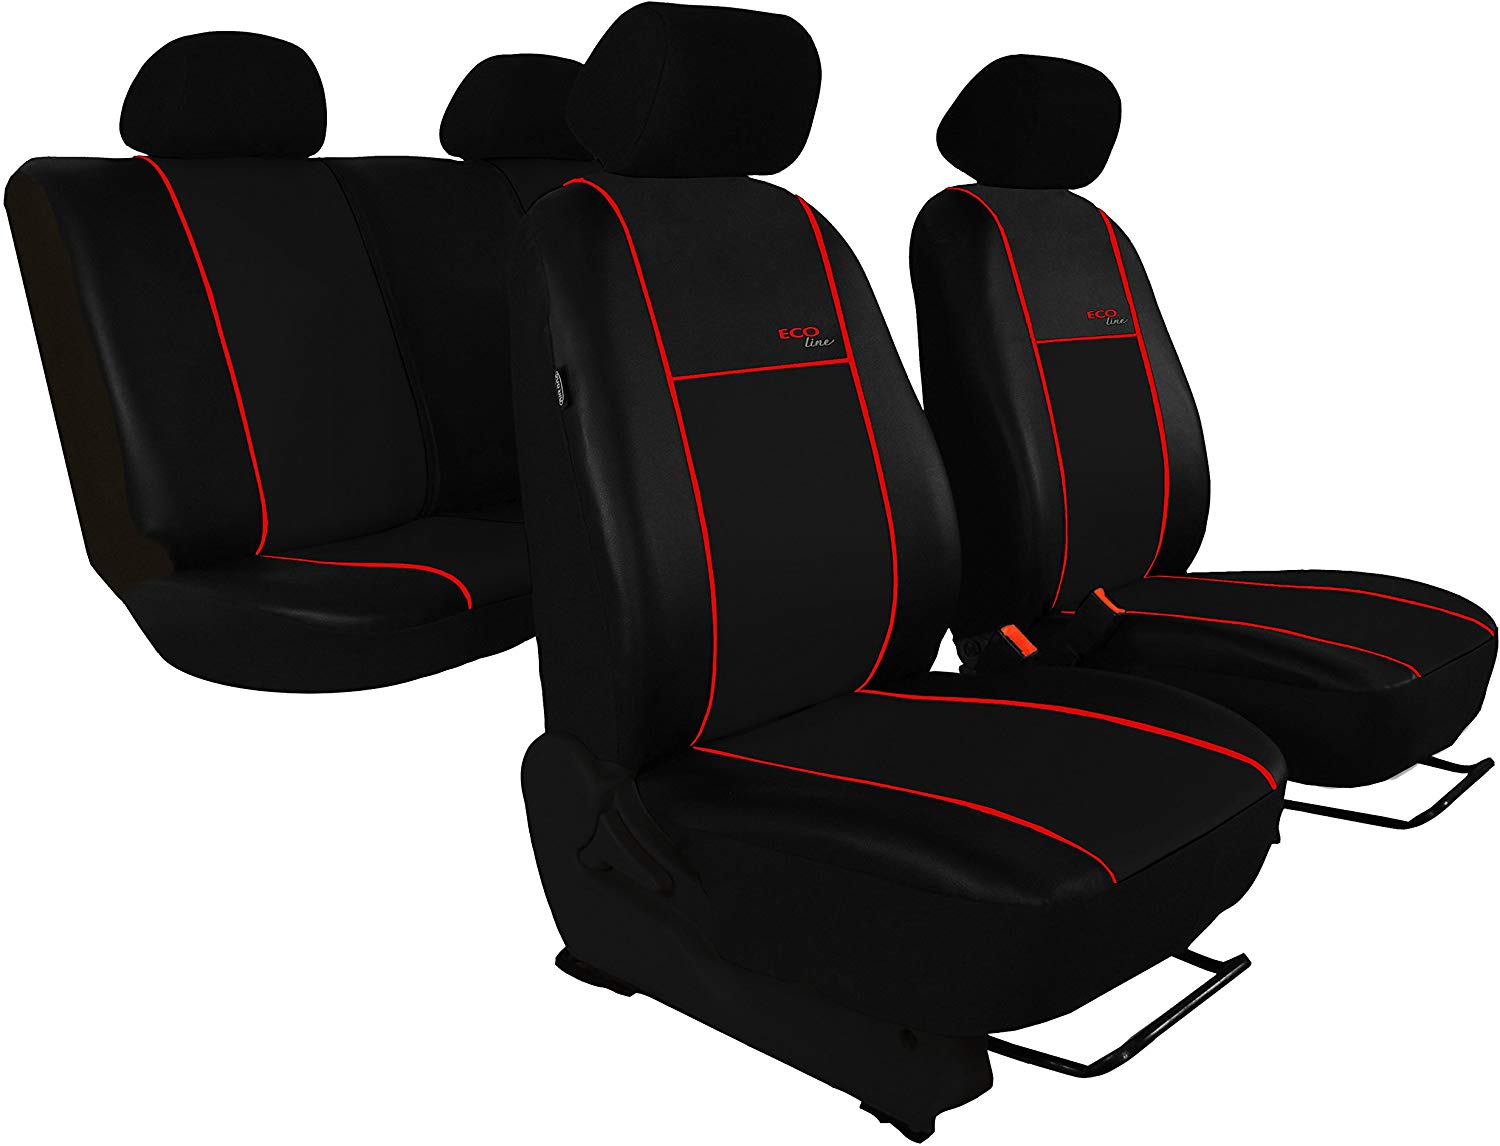 Customised Caddy Eco Line Design Bright Red Blade. Car Seat Cover Set